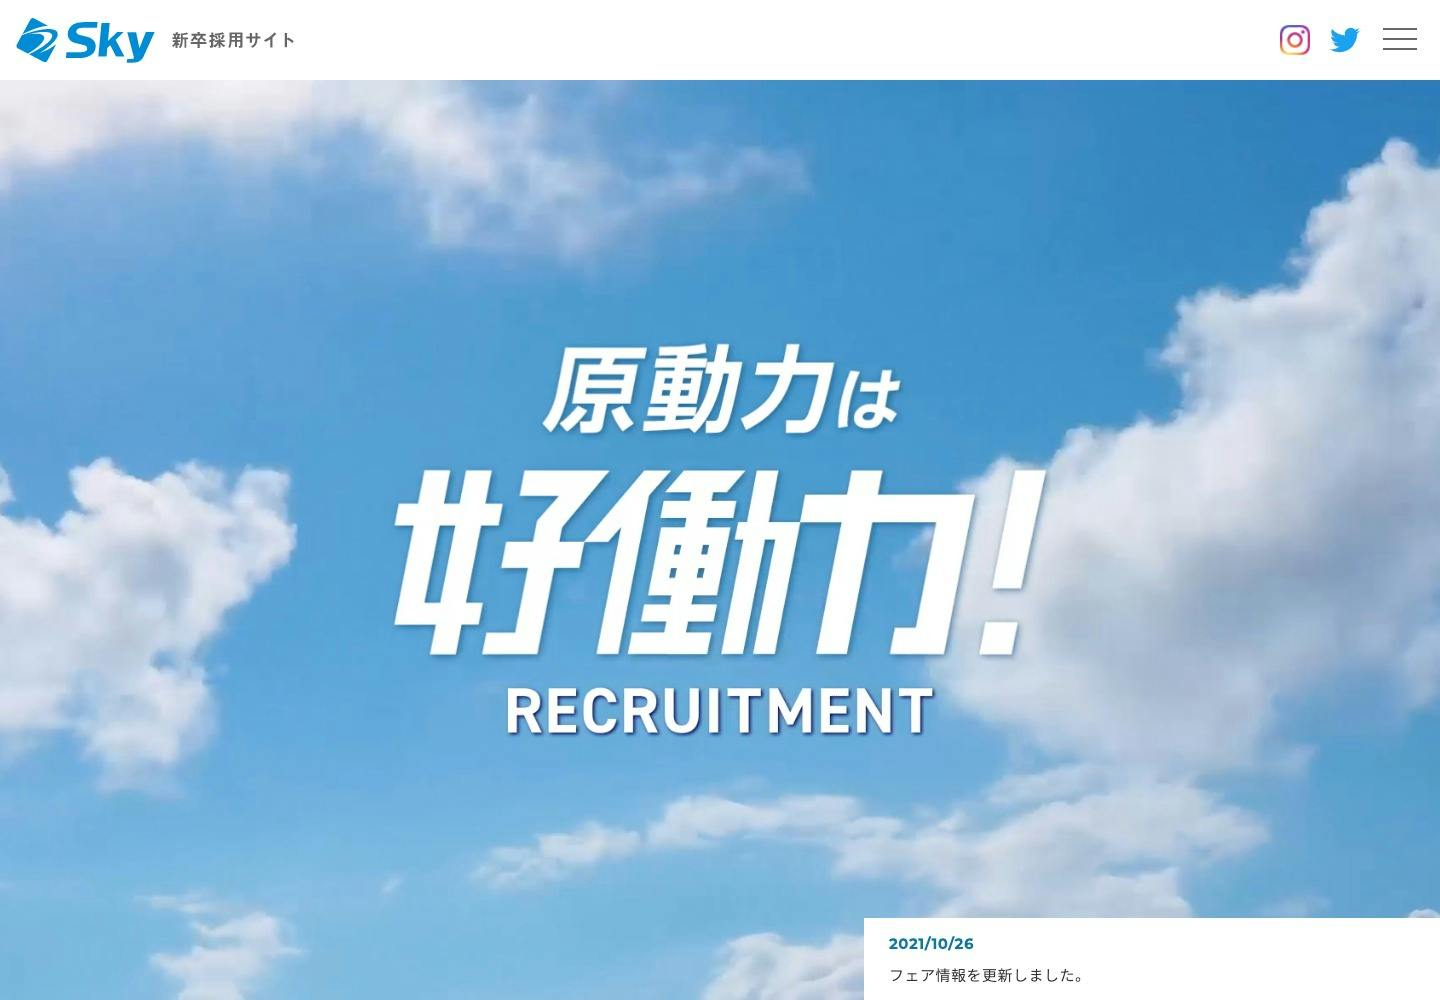 Cover Image for Ｓｋｙ株式会社 新卒採用 – 好働力！